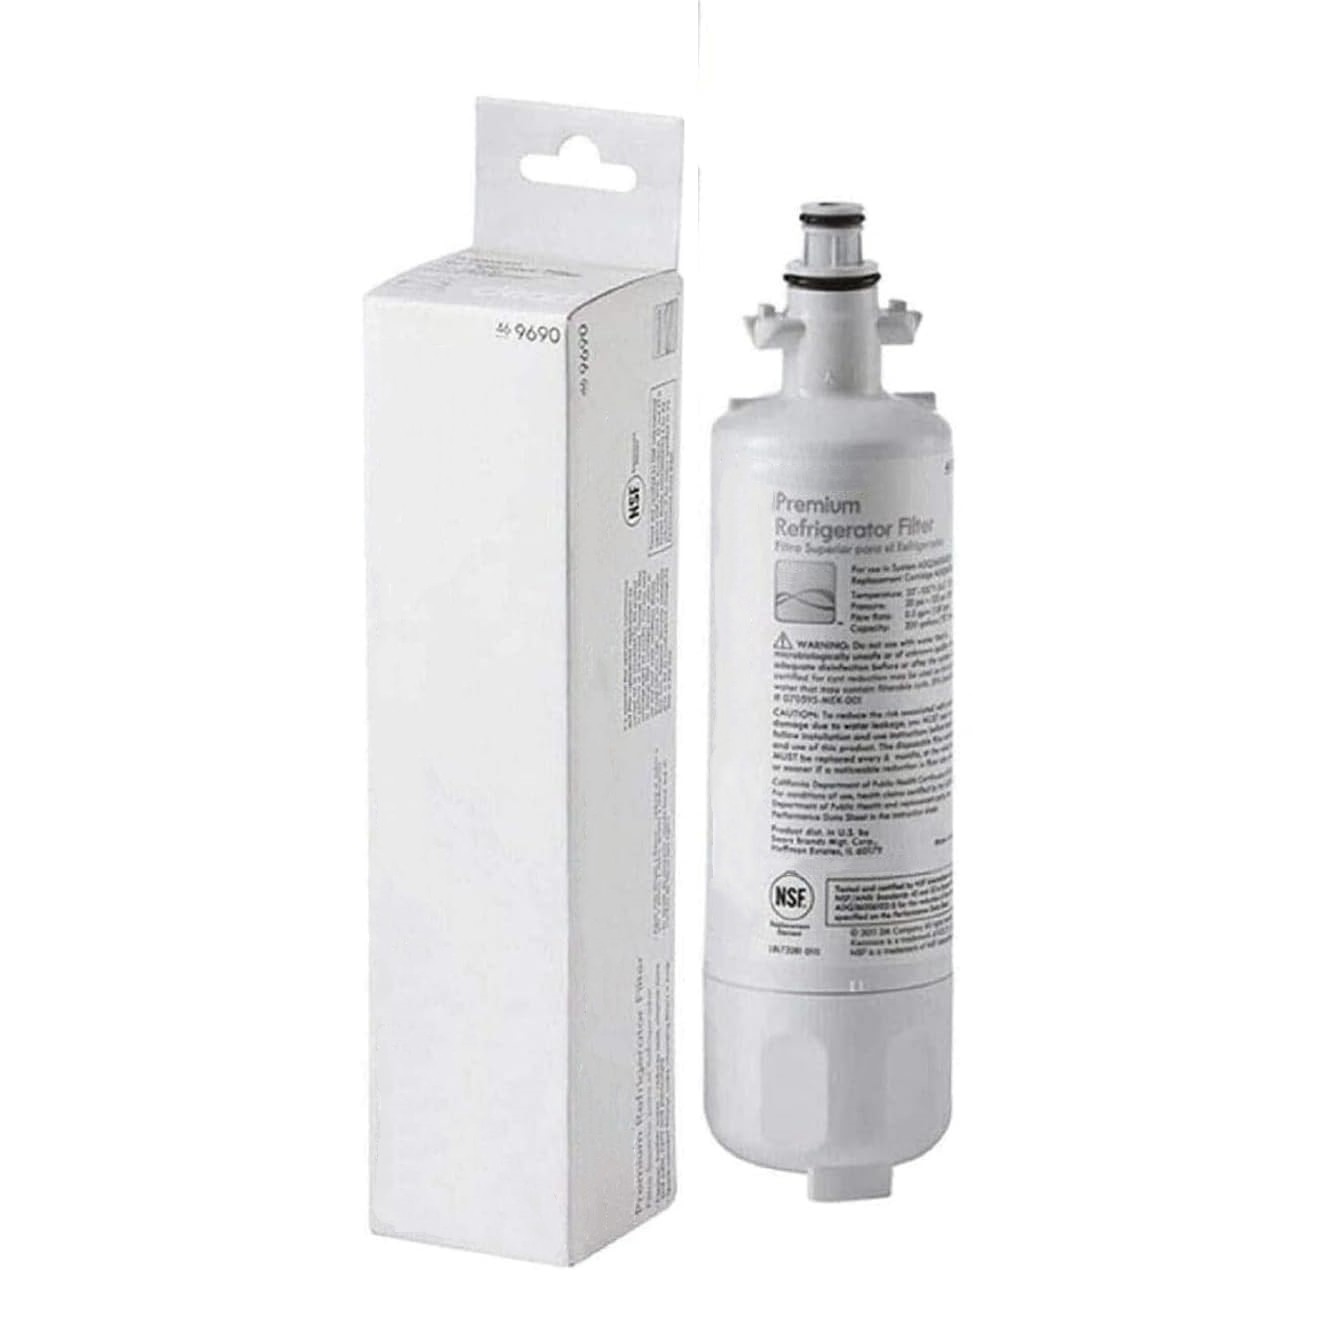 China Refrigerator Water Filter Cartridge Replacement for 9690 469690 Fridge Water Filters factory